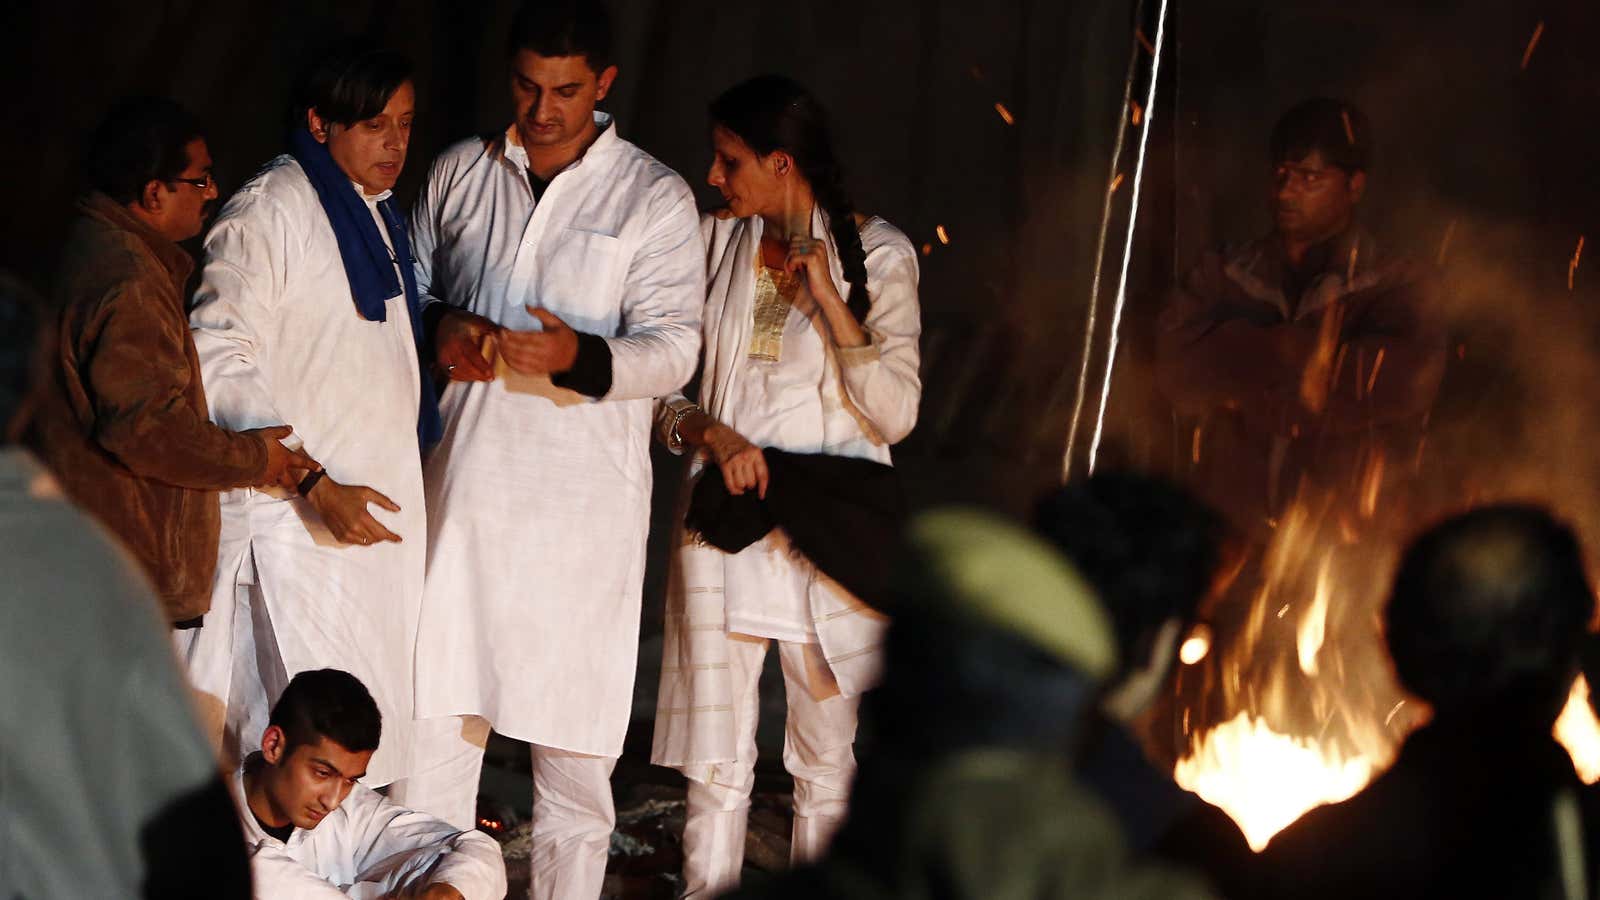 Shashi Tharoor, a minister in the Indian government, at his wife’s funeral pyre earlier today.